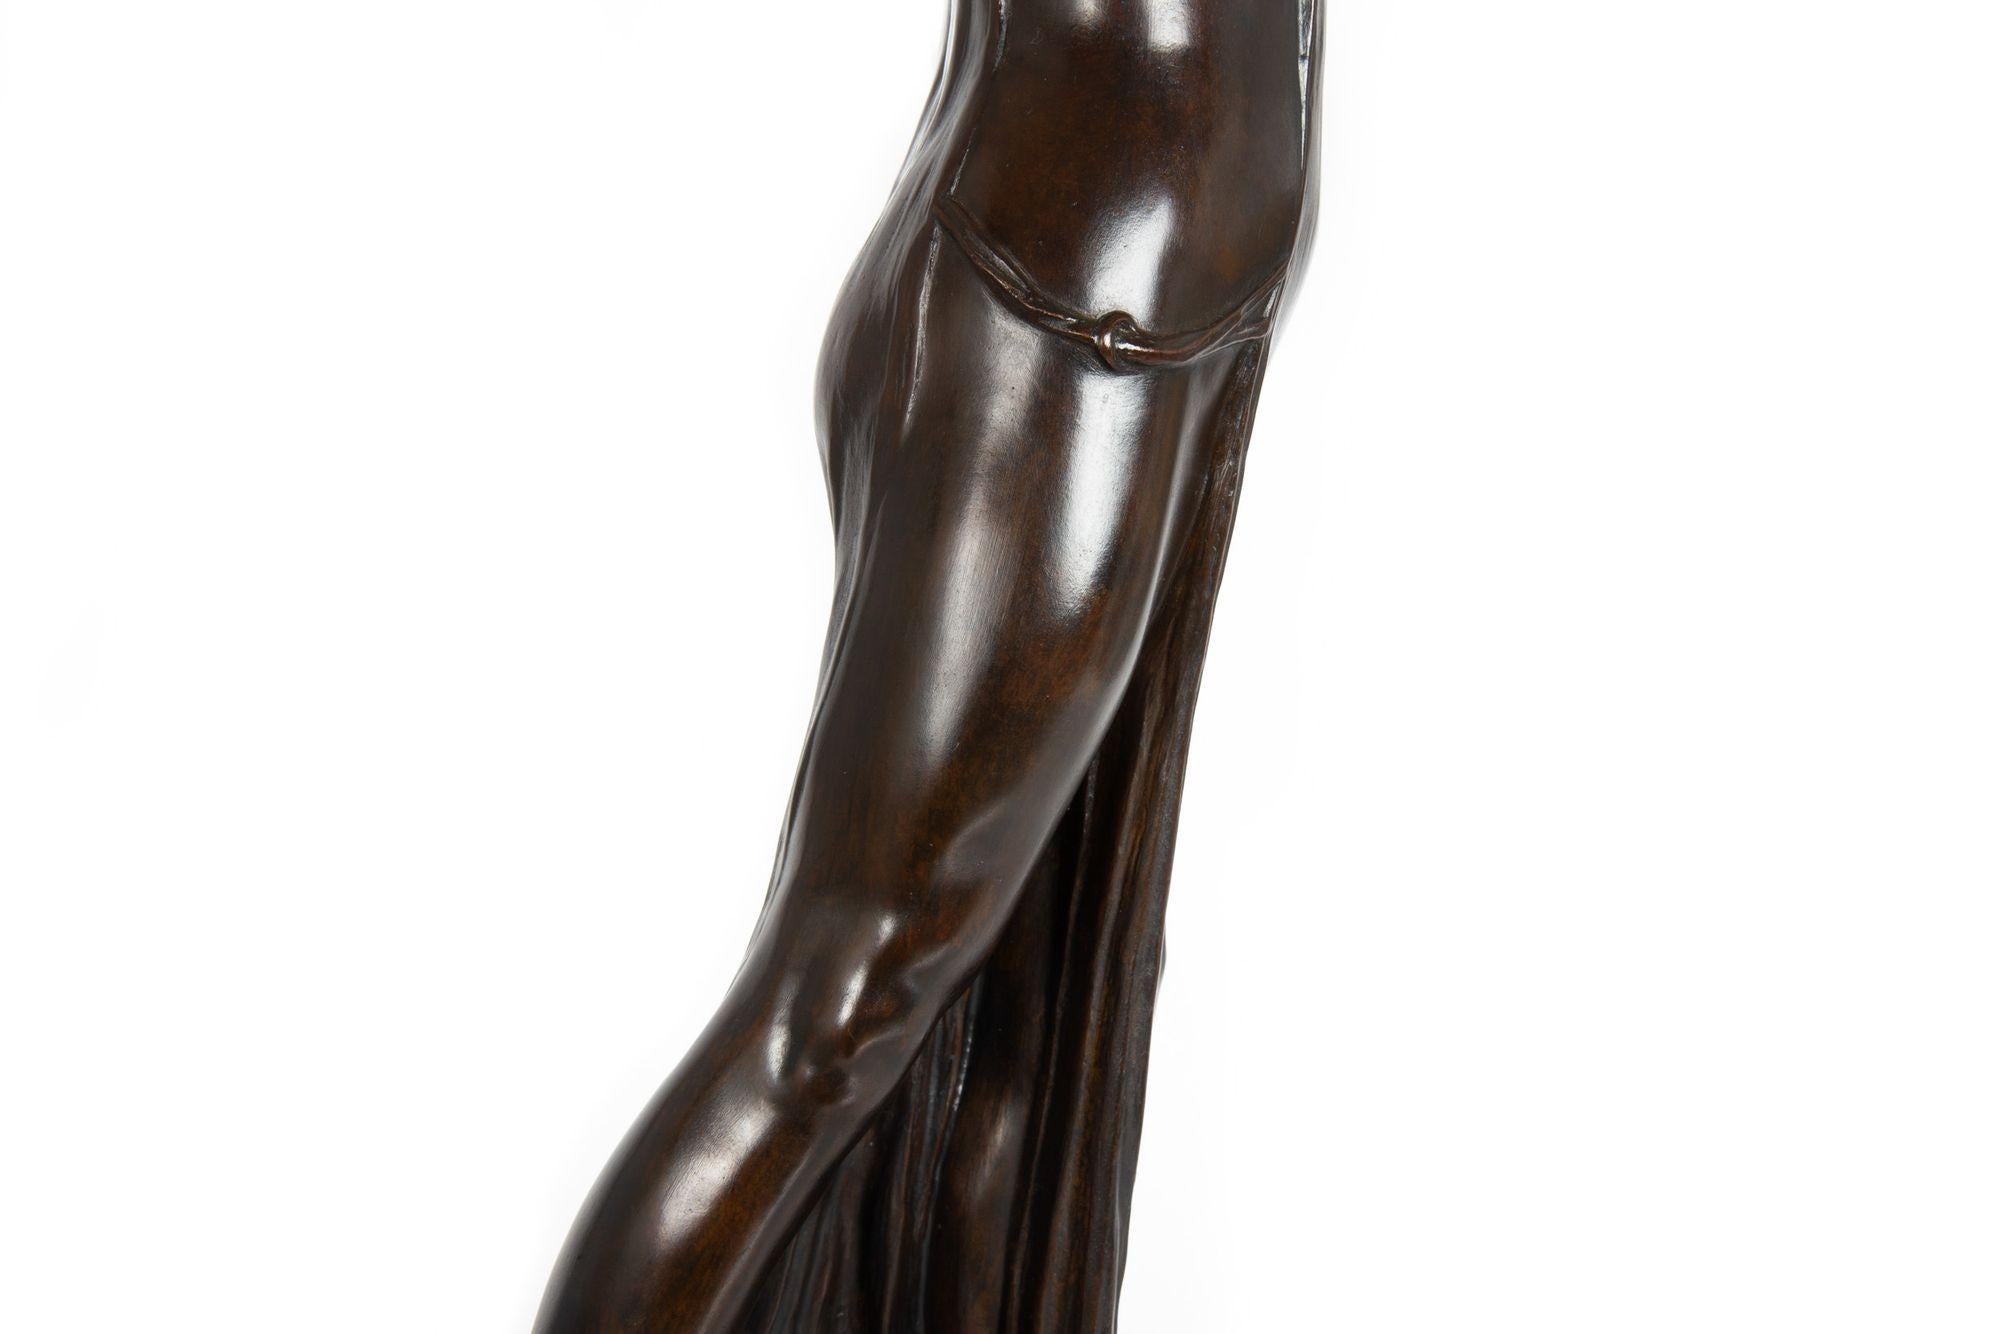 Rare Art Nouveau French Bronze Sculpture “Ariadne” by Georges Flamand 12